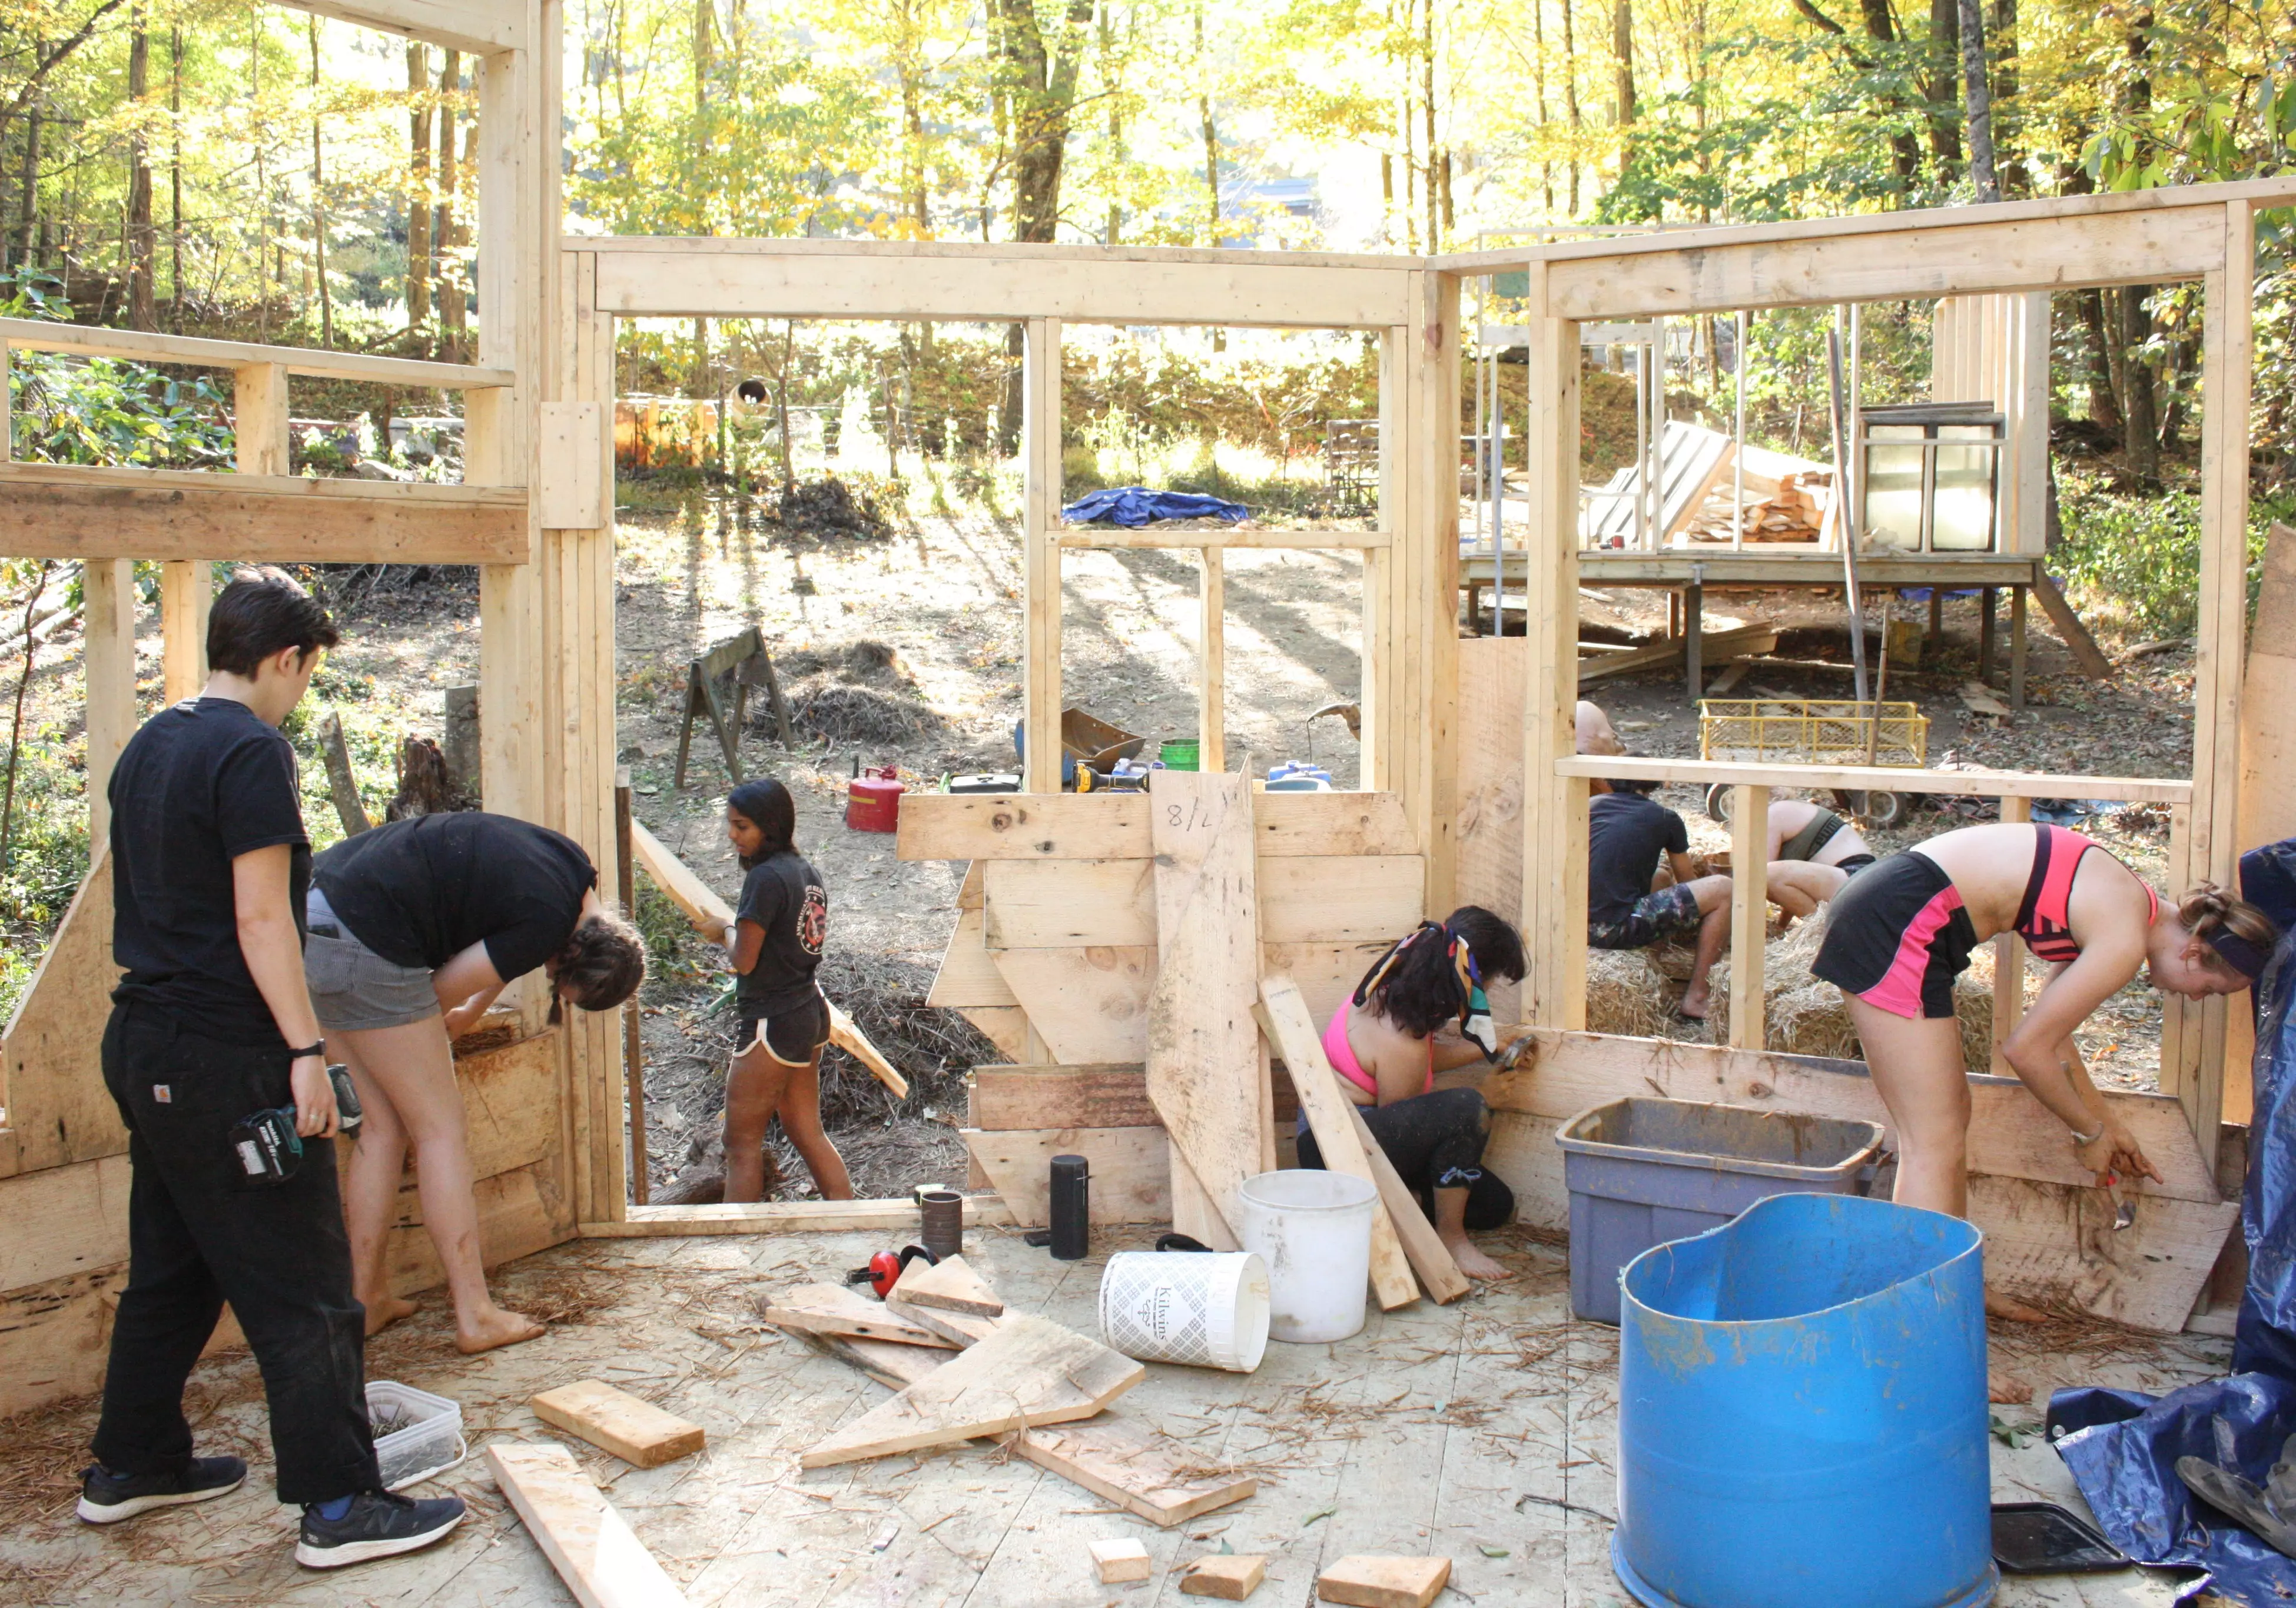 Everyone hard at work building a cabin!